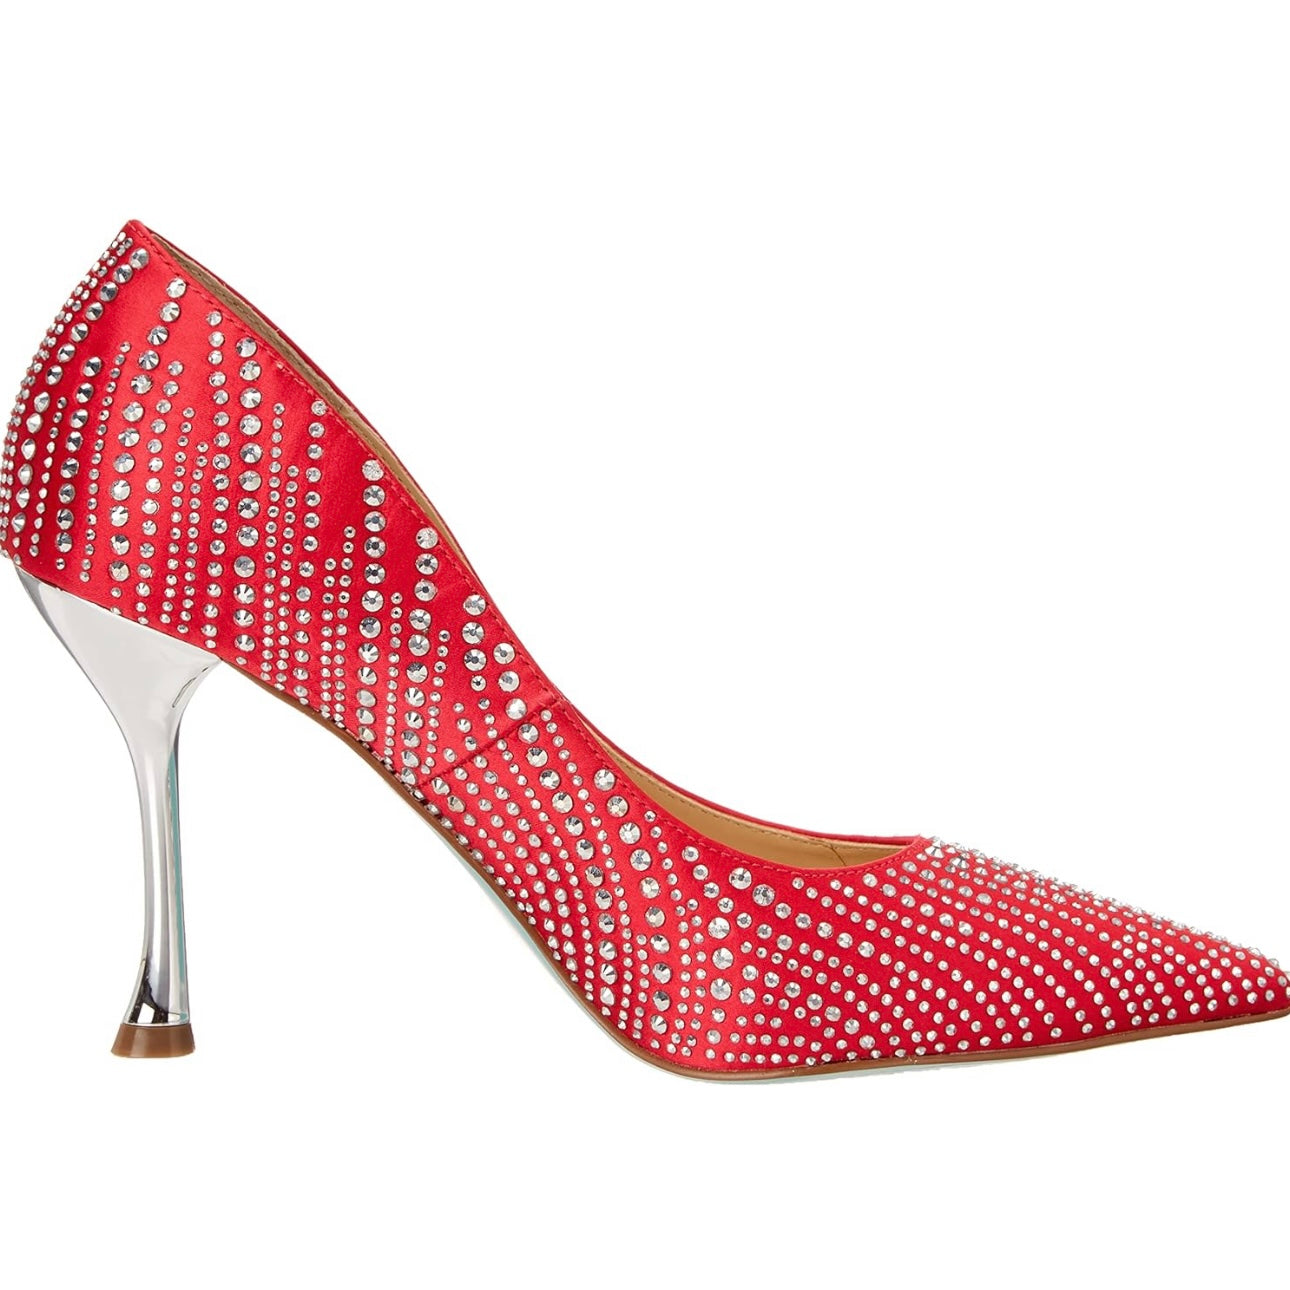 Betsey Johnson Alesi Embellished Pointed Toe Heels - Red